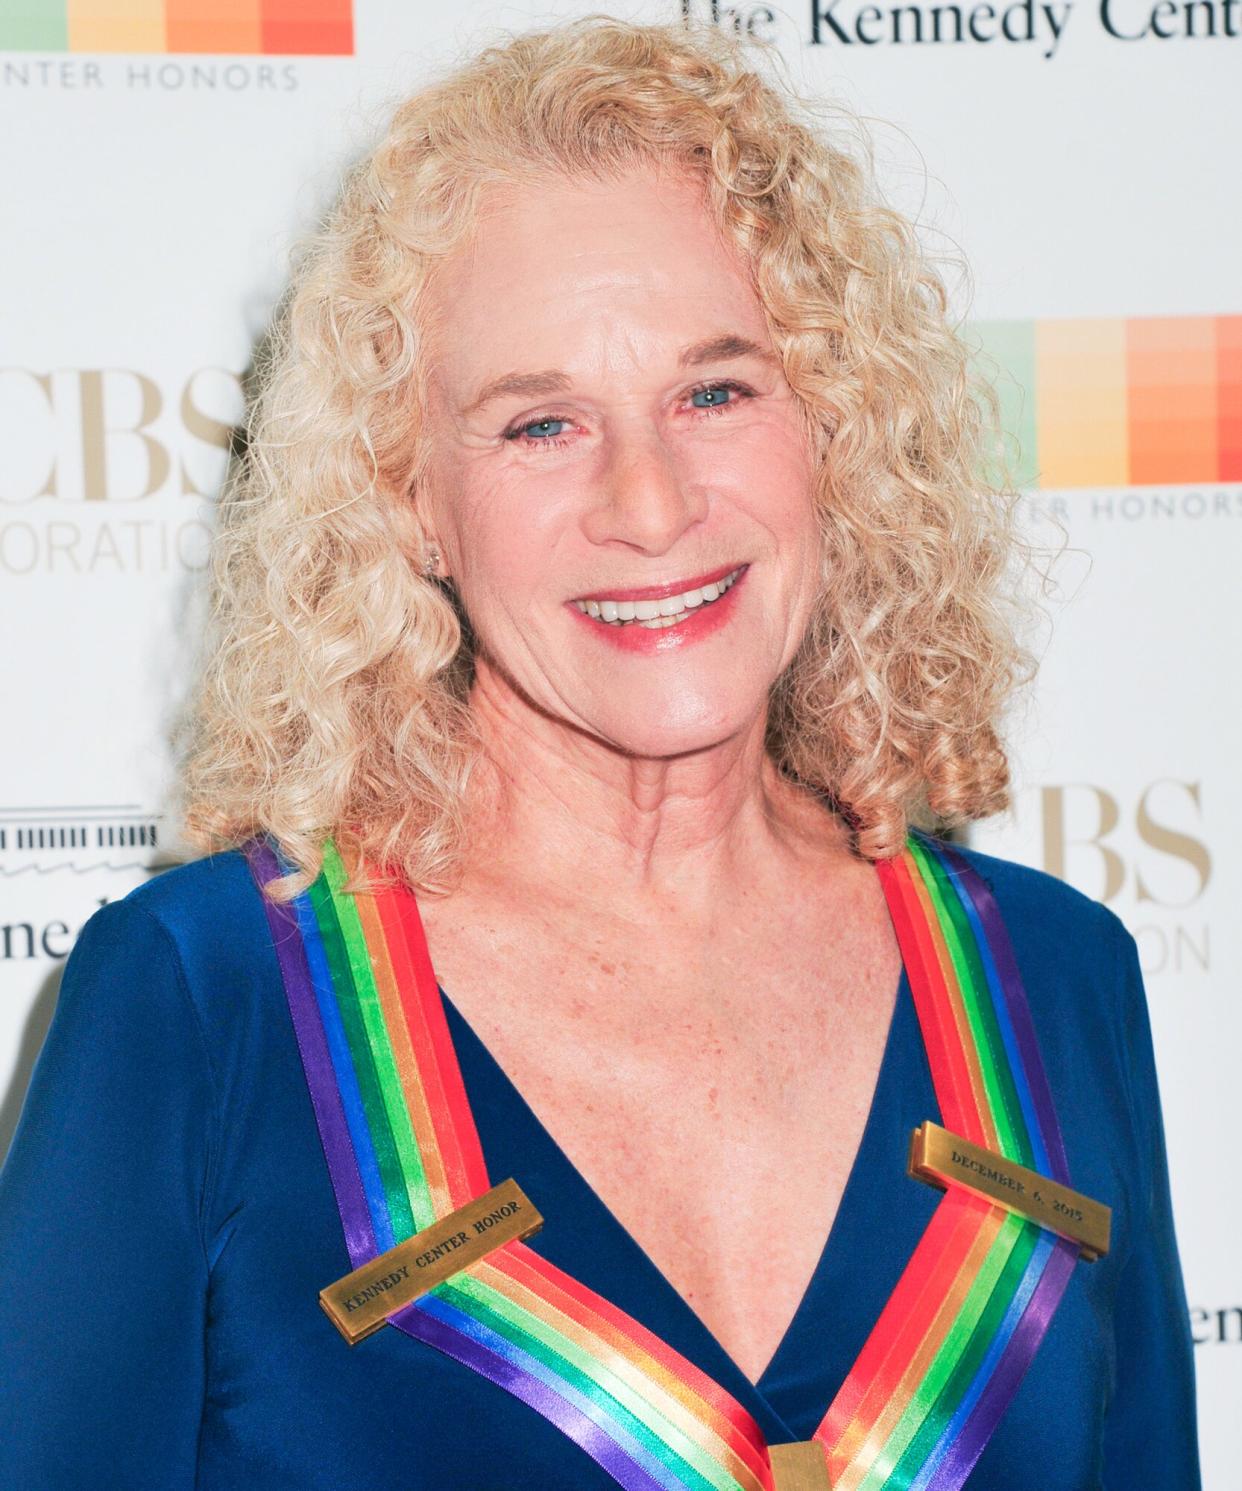 Honoree and singer-songwriter Carole King arrives at the 38th Annual Kennedy Center Honors Gala at the Kennedy Center for the Performing Arts on December 6, 2015 in Washington, DC.